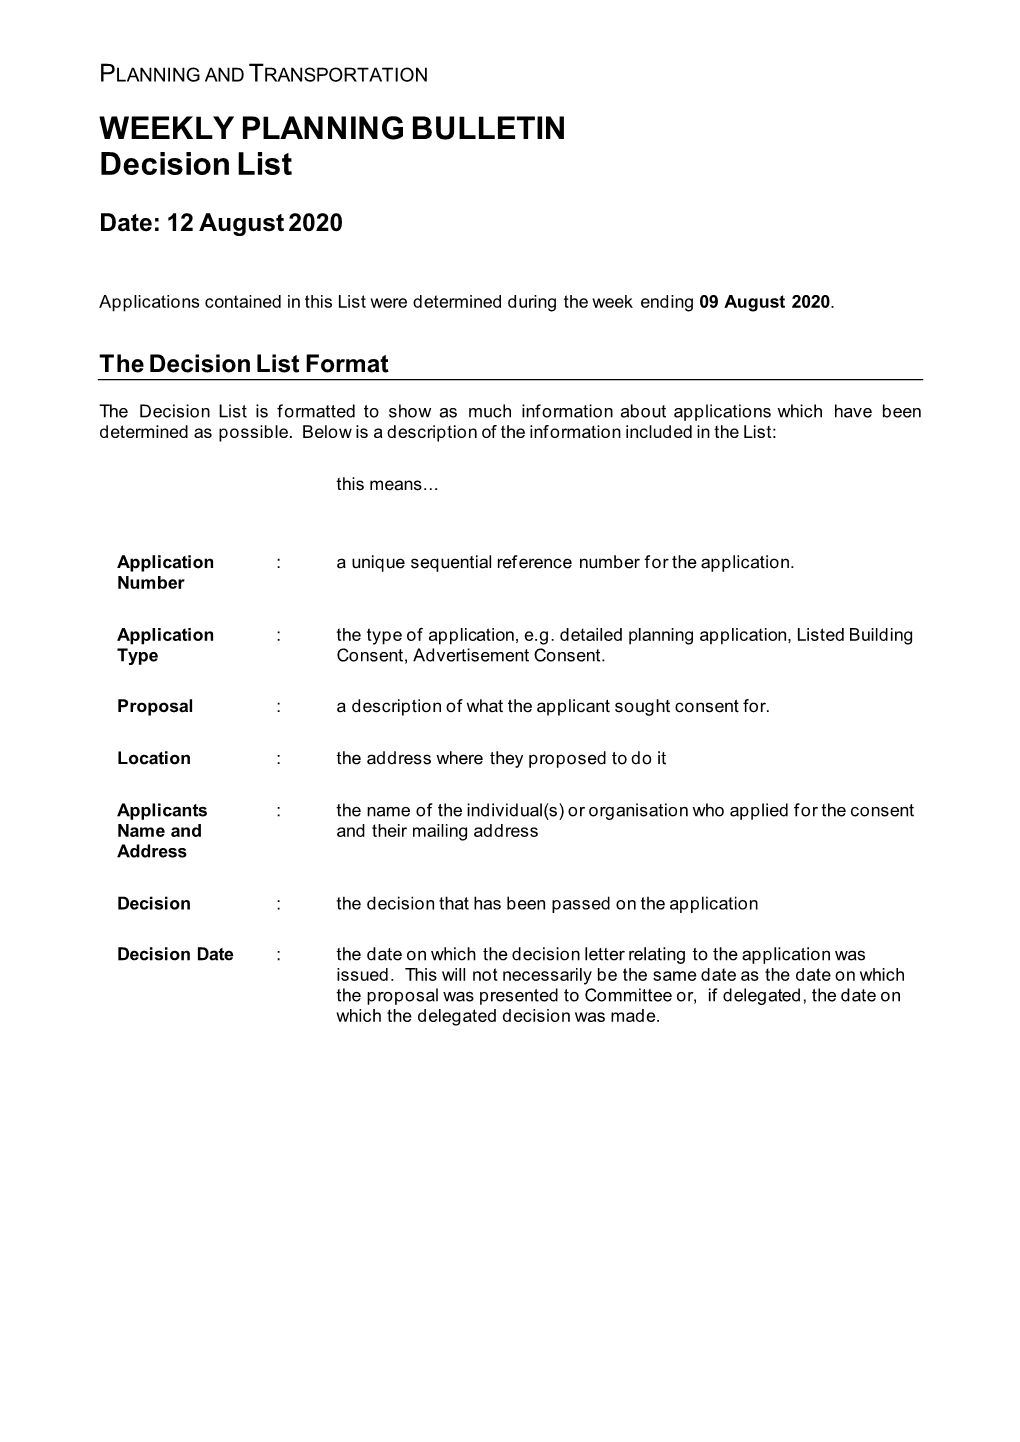 Planning Applications Determined 09 August 2020